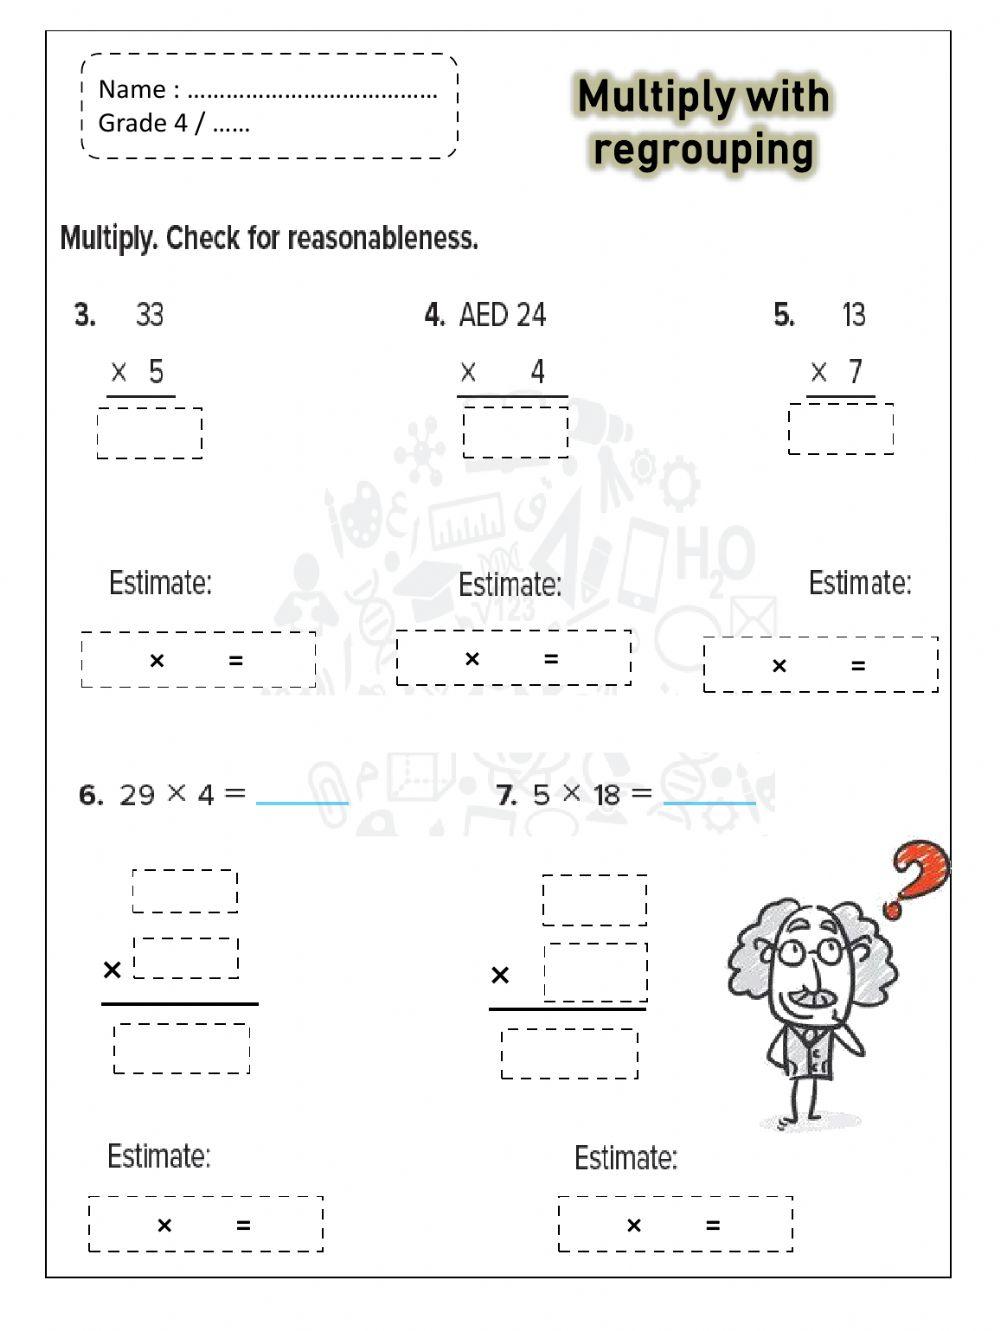 Multiply with regrouping